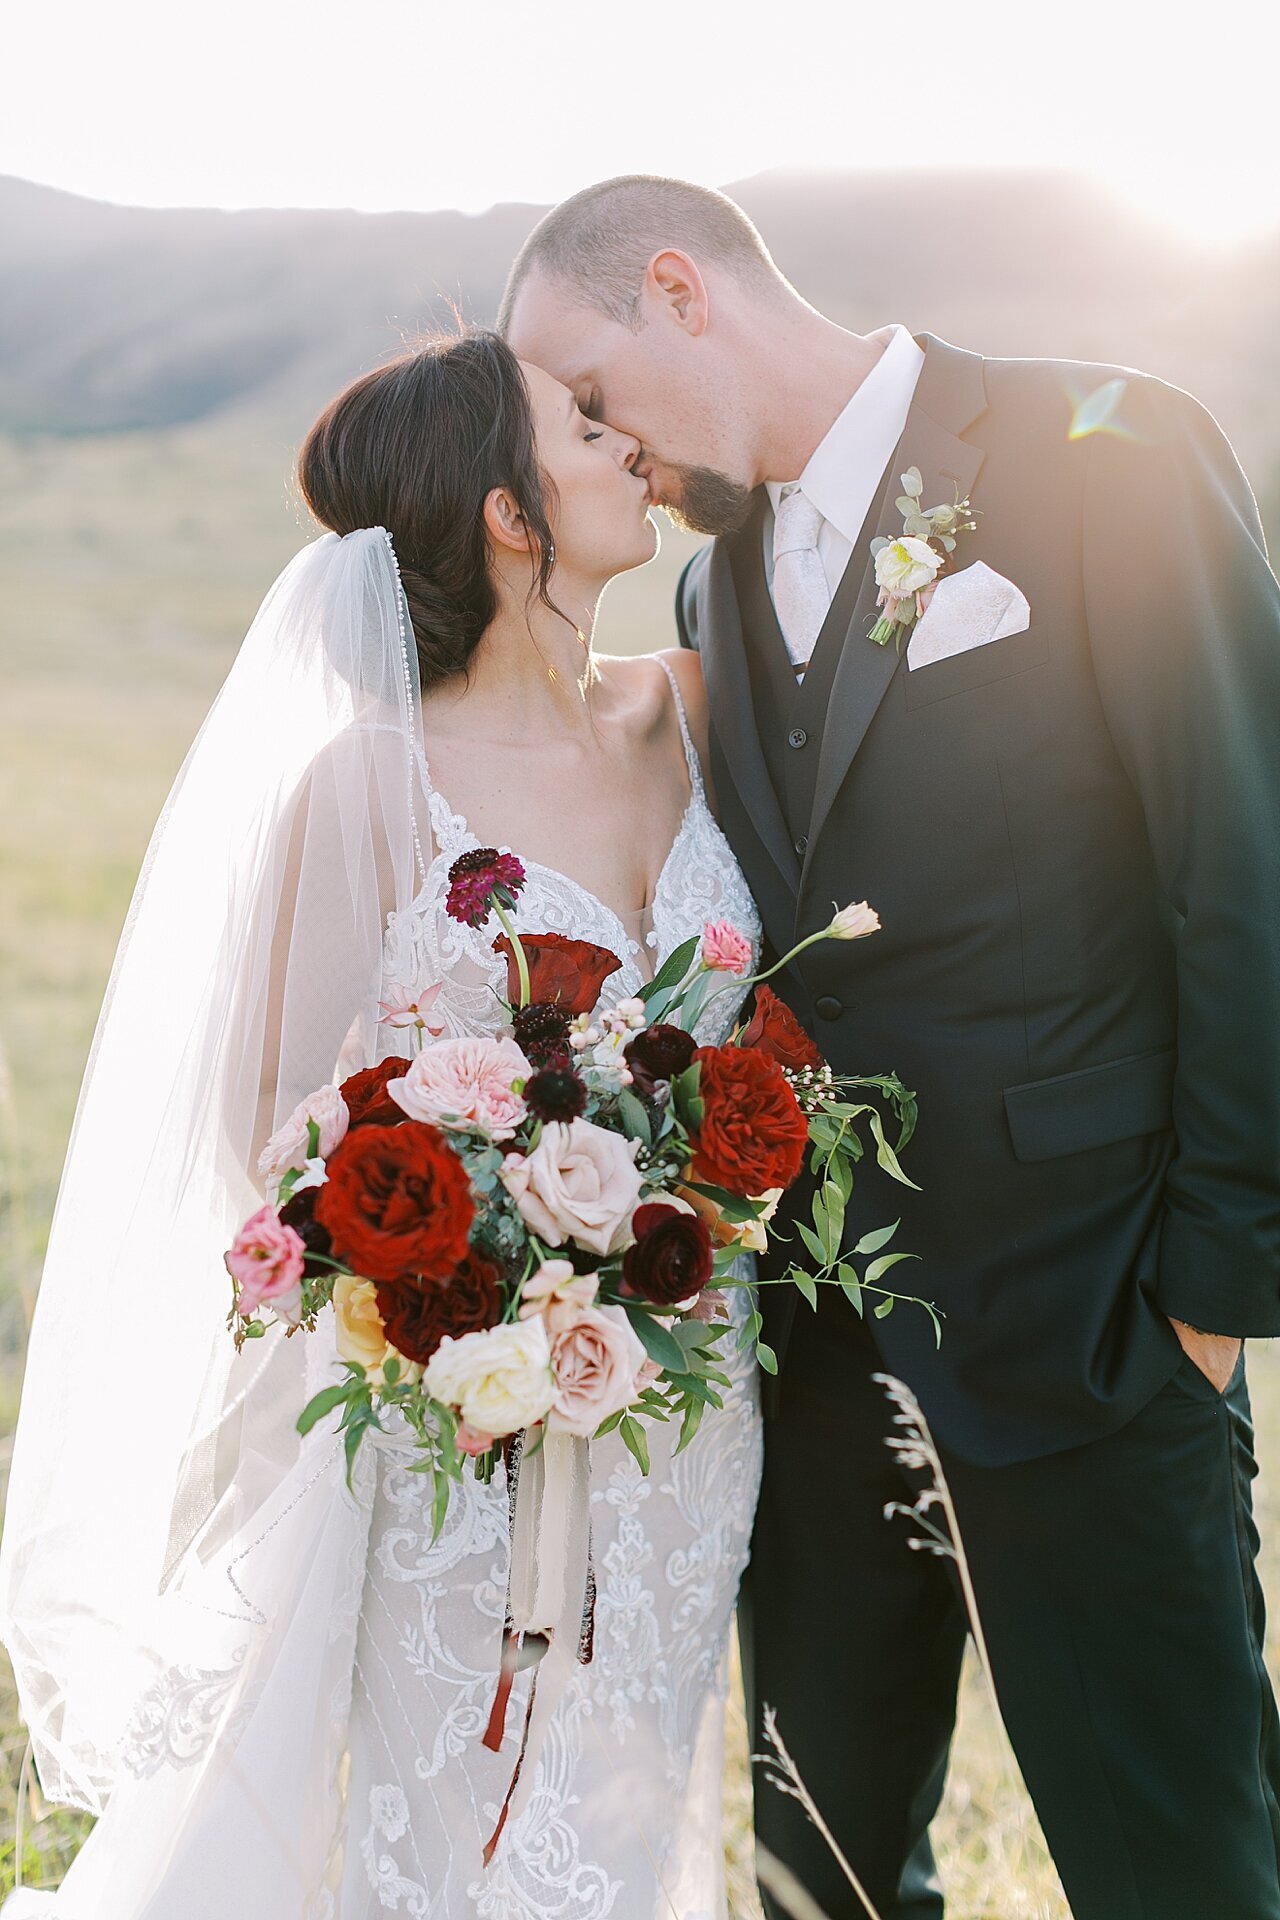 high end luxury wedding photography real wedding bride and groom colorado photographer near denver rocky mountain photographers light and airy style colorado based wedding portraits in the mountains at the Manor House_2816